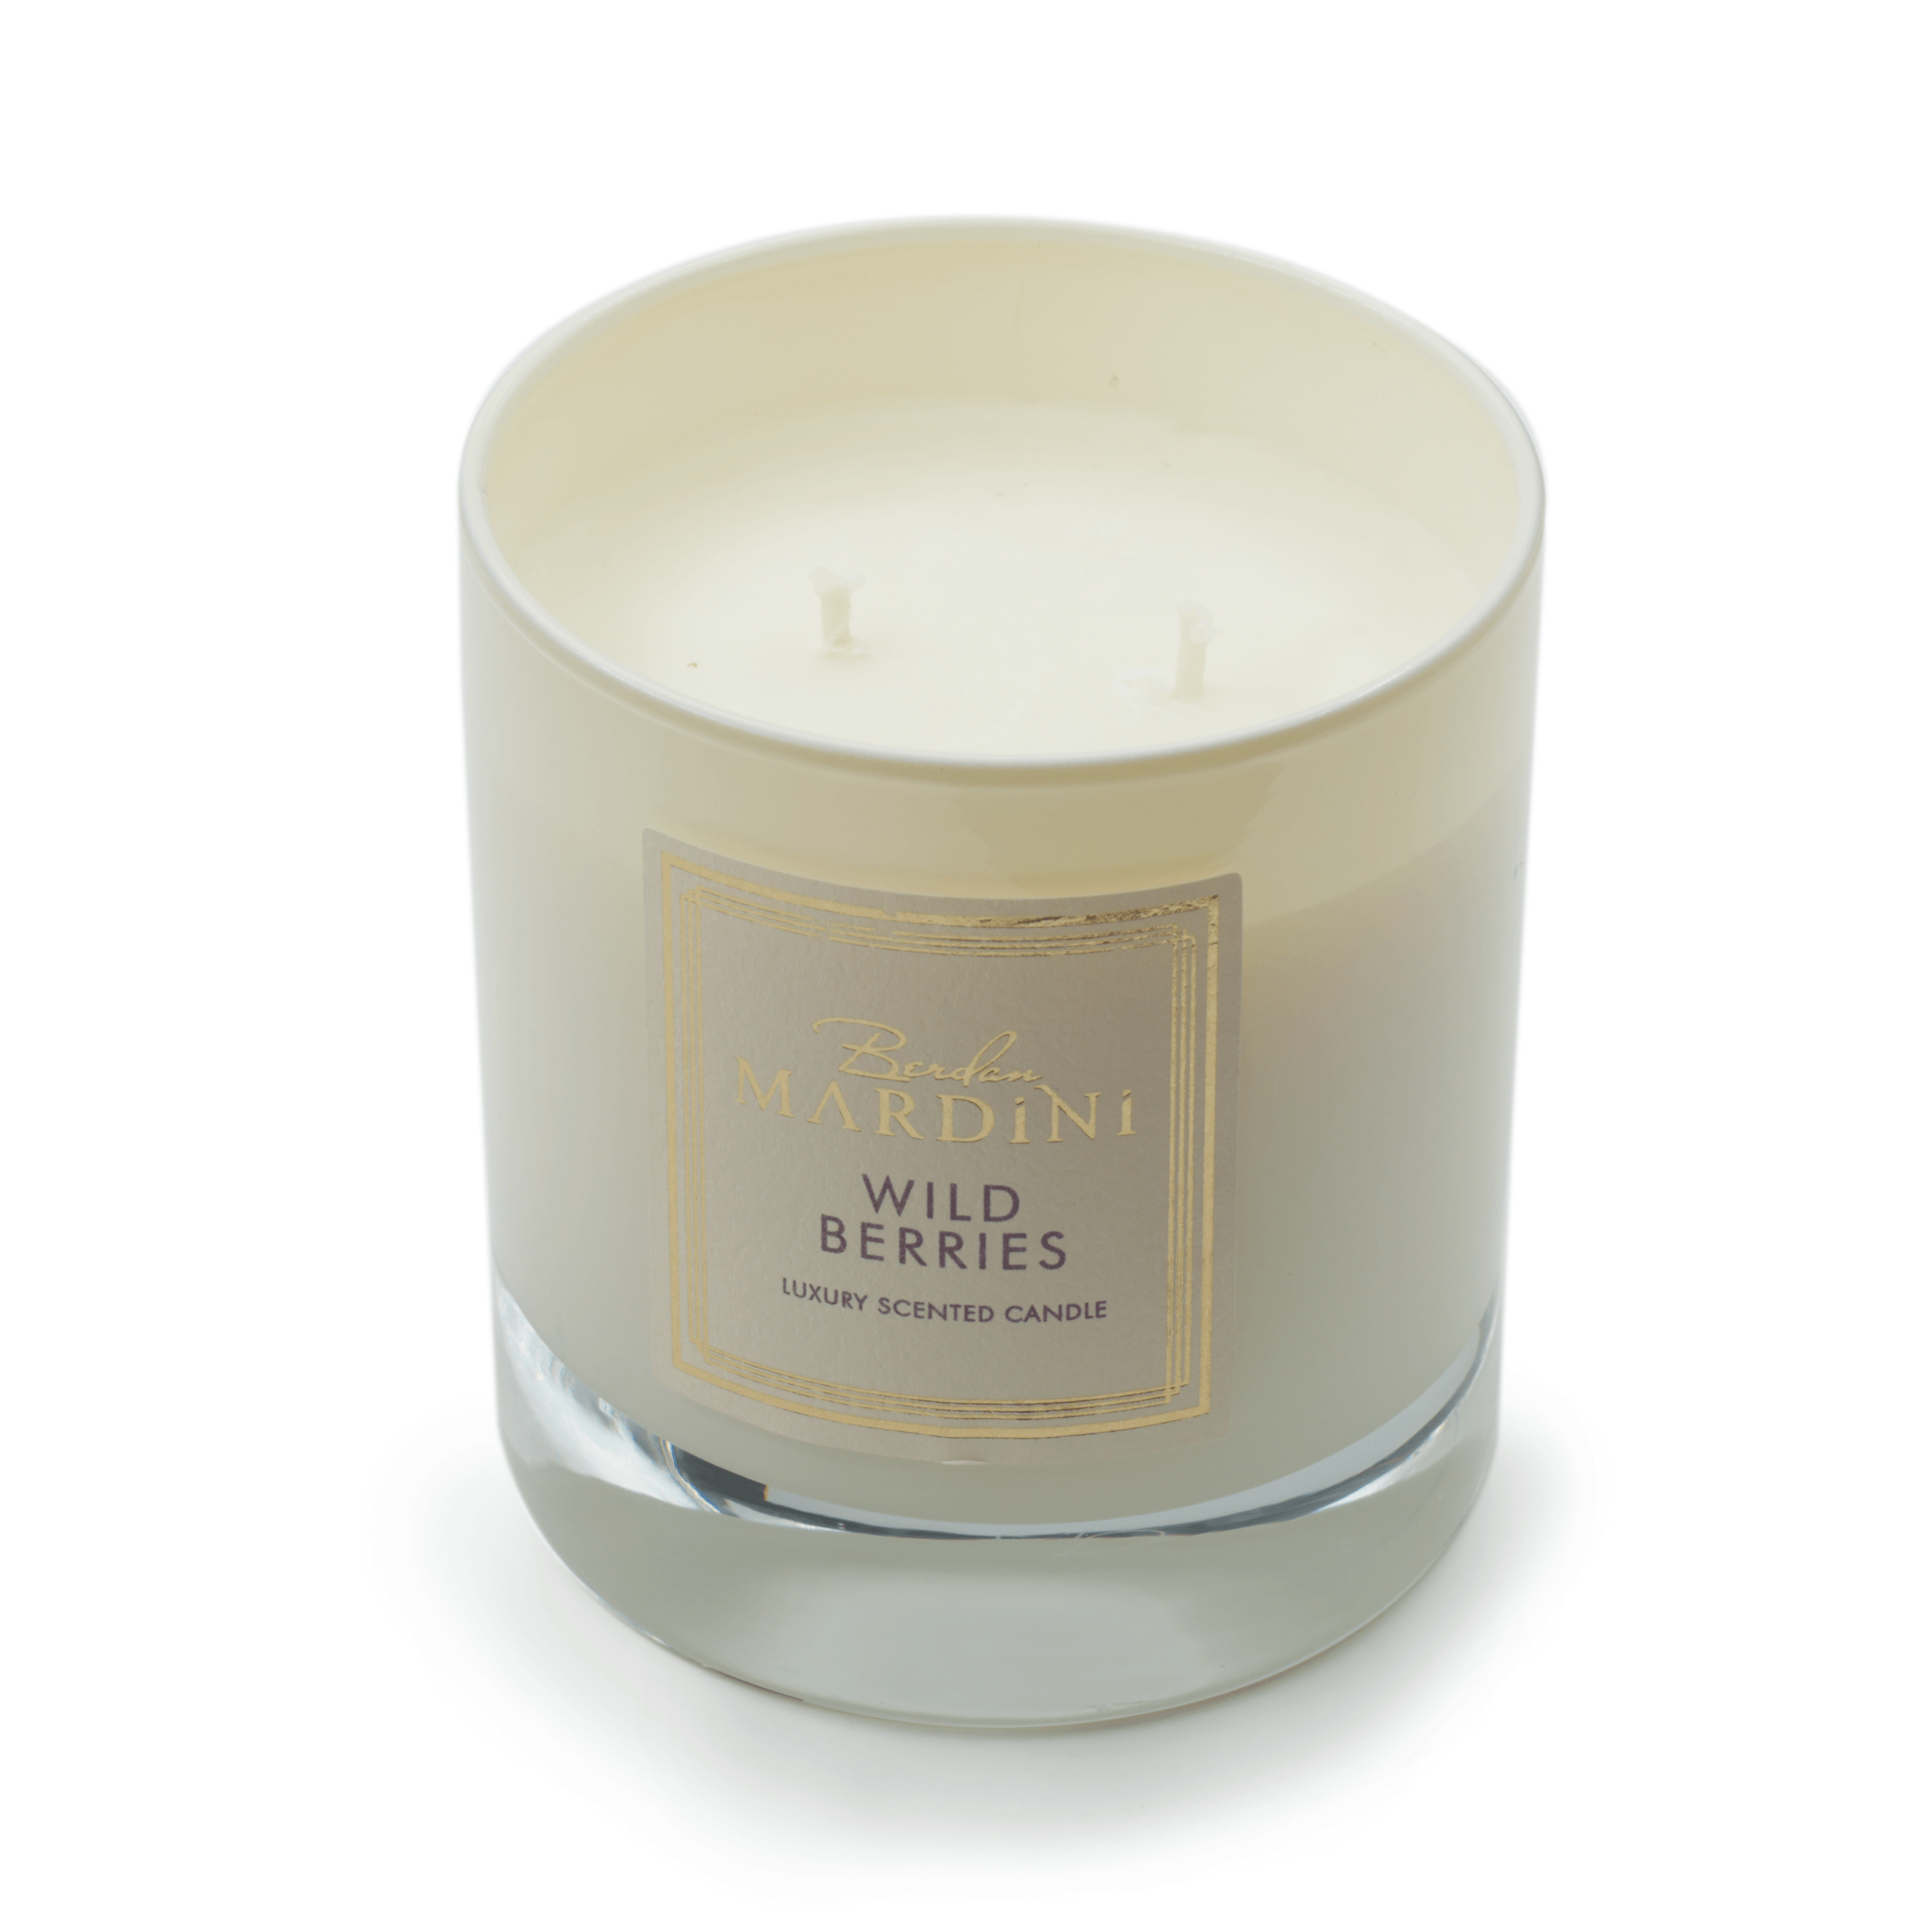 WILD BERRIES LUXURY SCENTED CANDLE